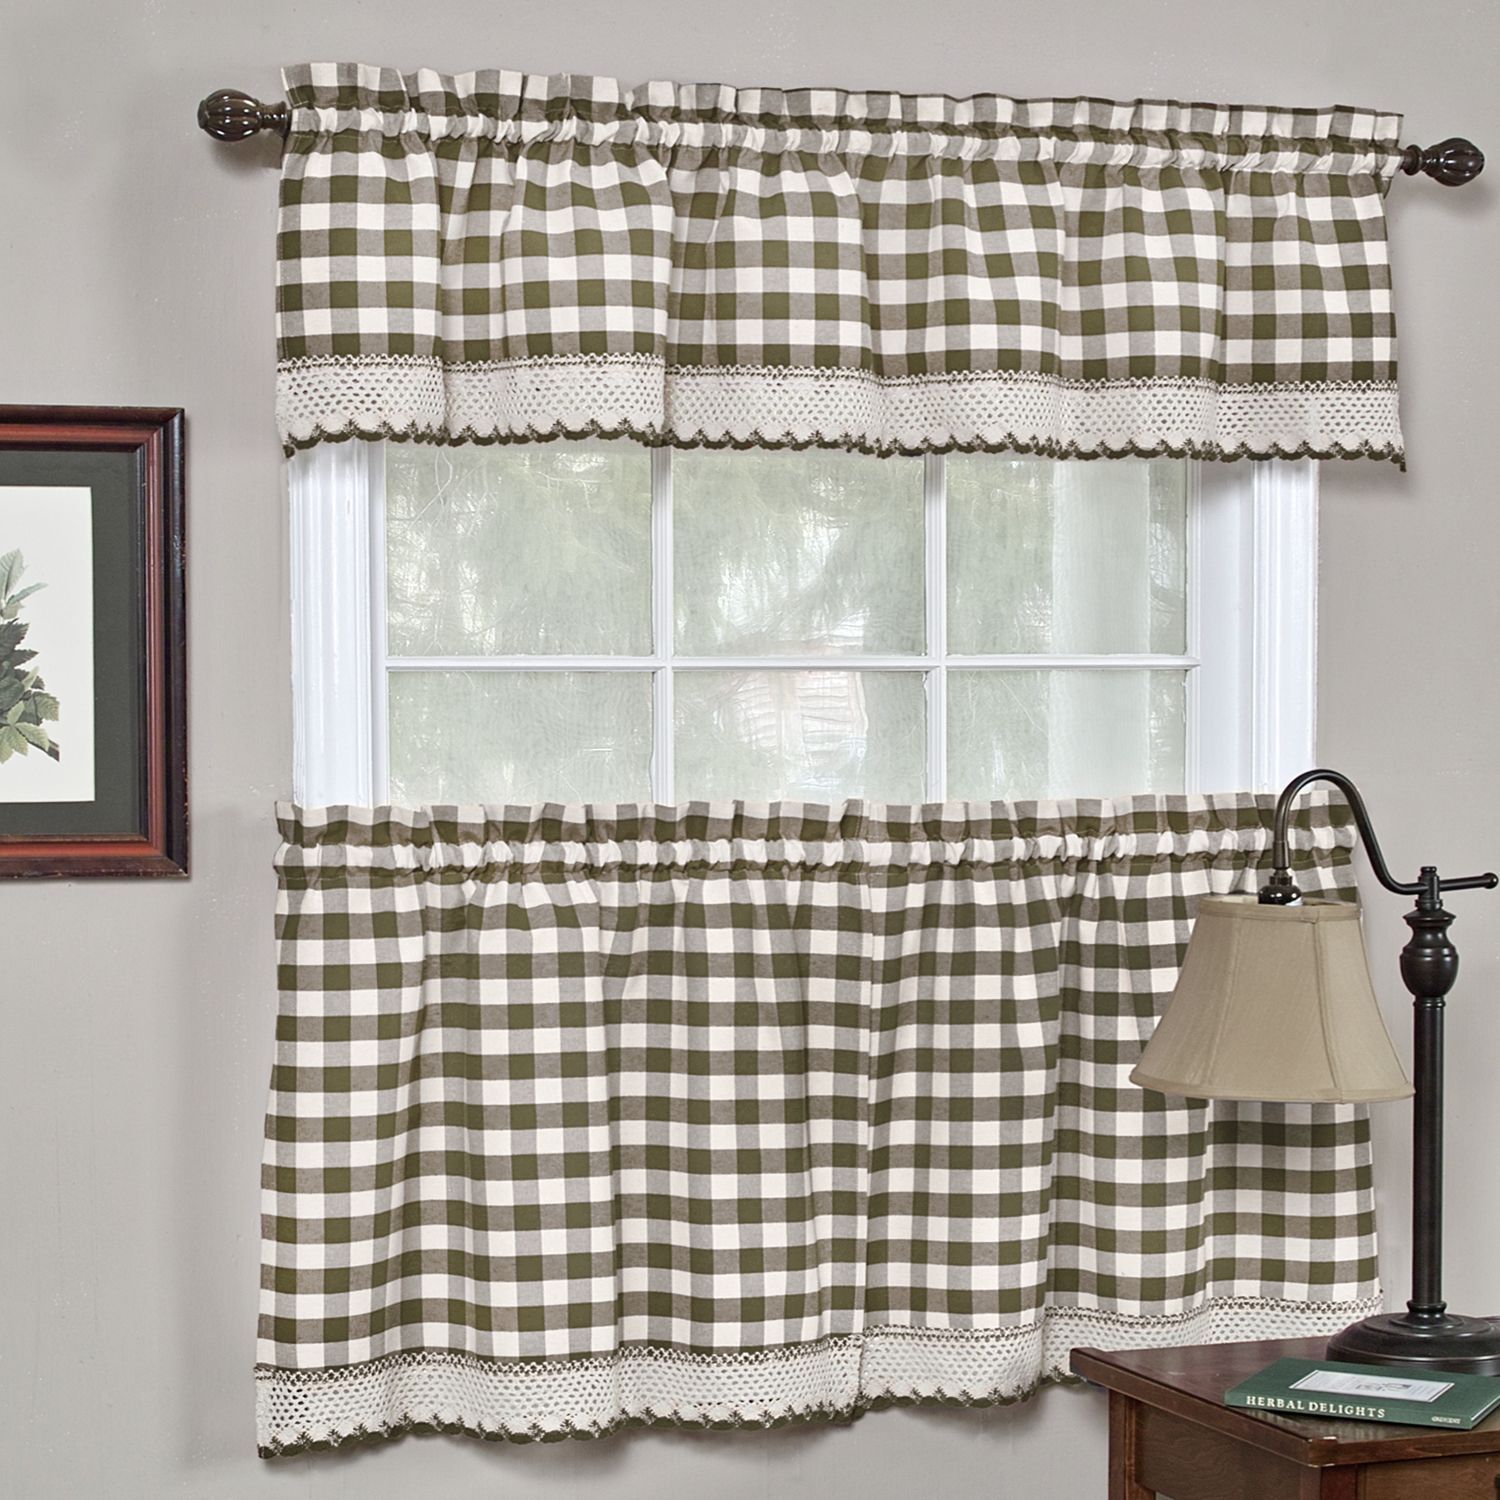 Classic Buffalo Check Kitchen Curtains (24 Tier Pair, Taupe Intended For Barnyard Buffalo Check Rooster Window Valances (View 8 of 20)